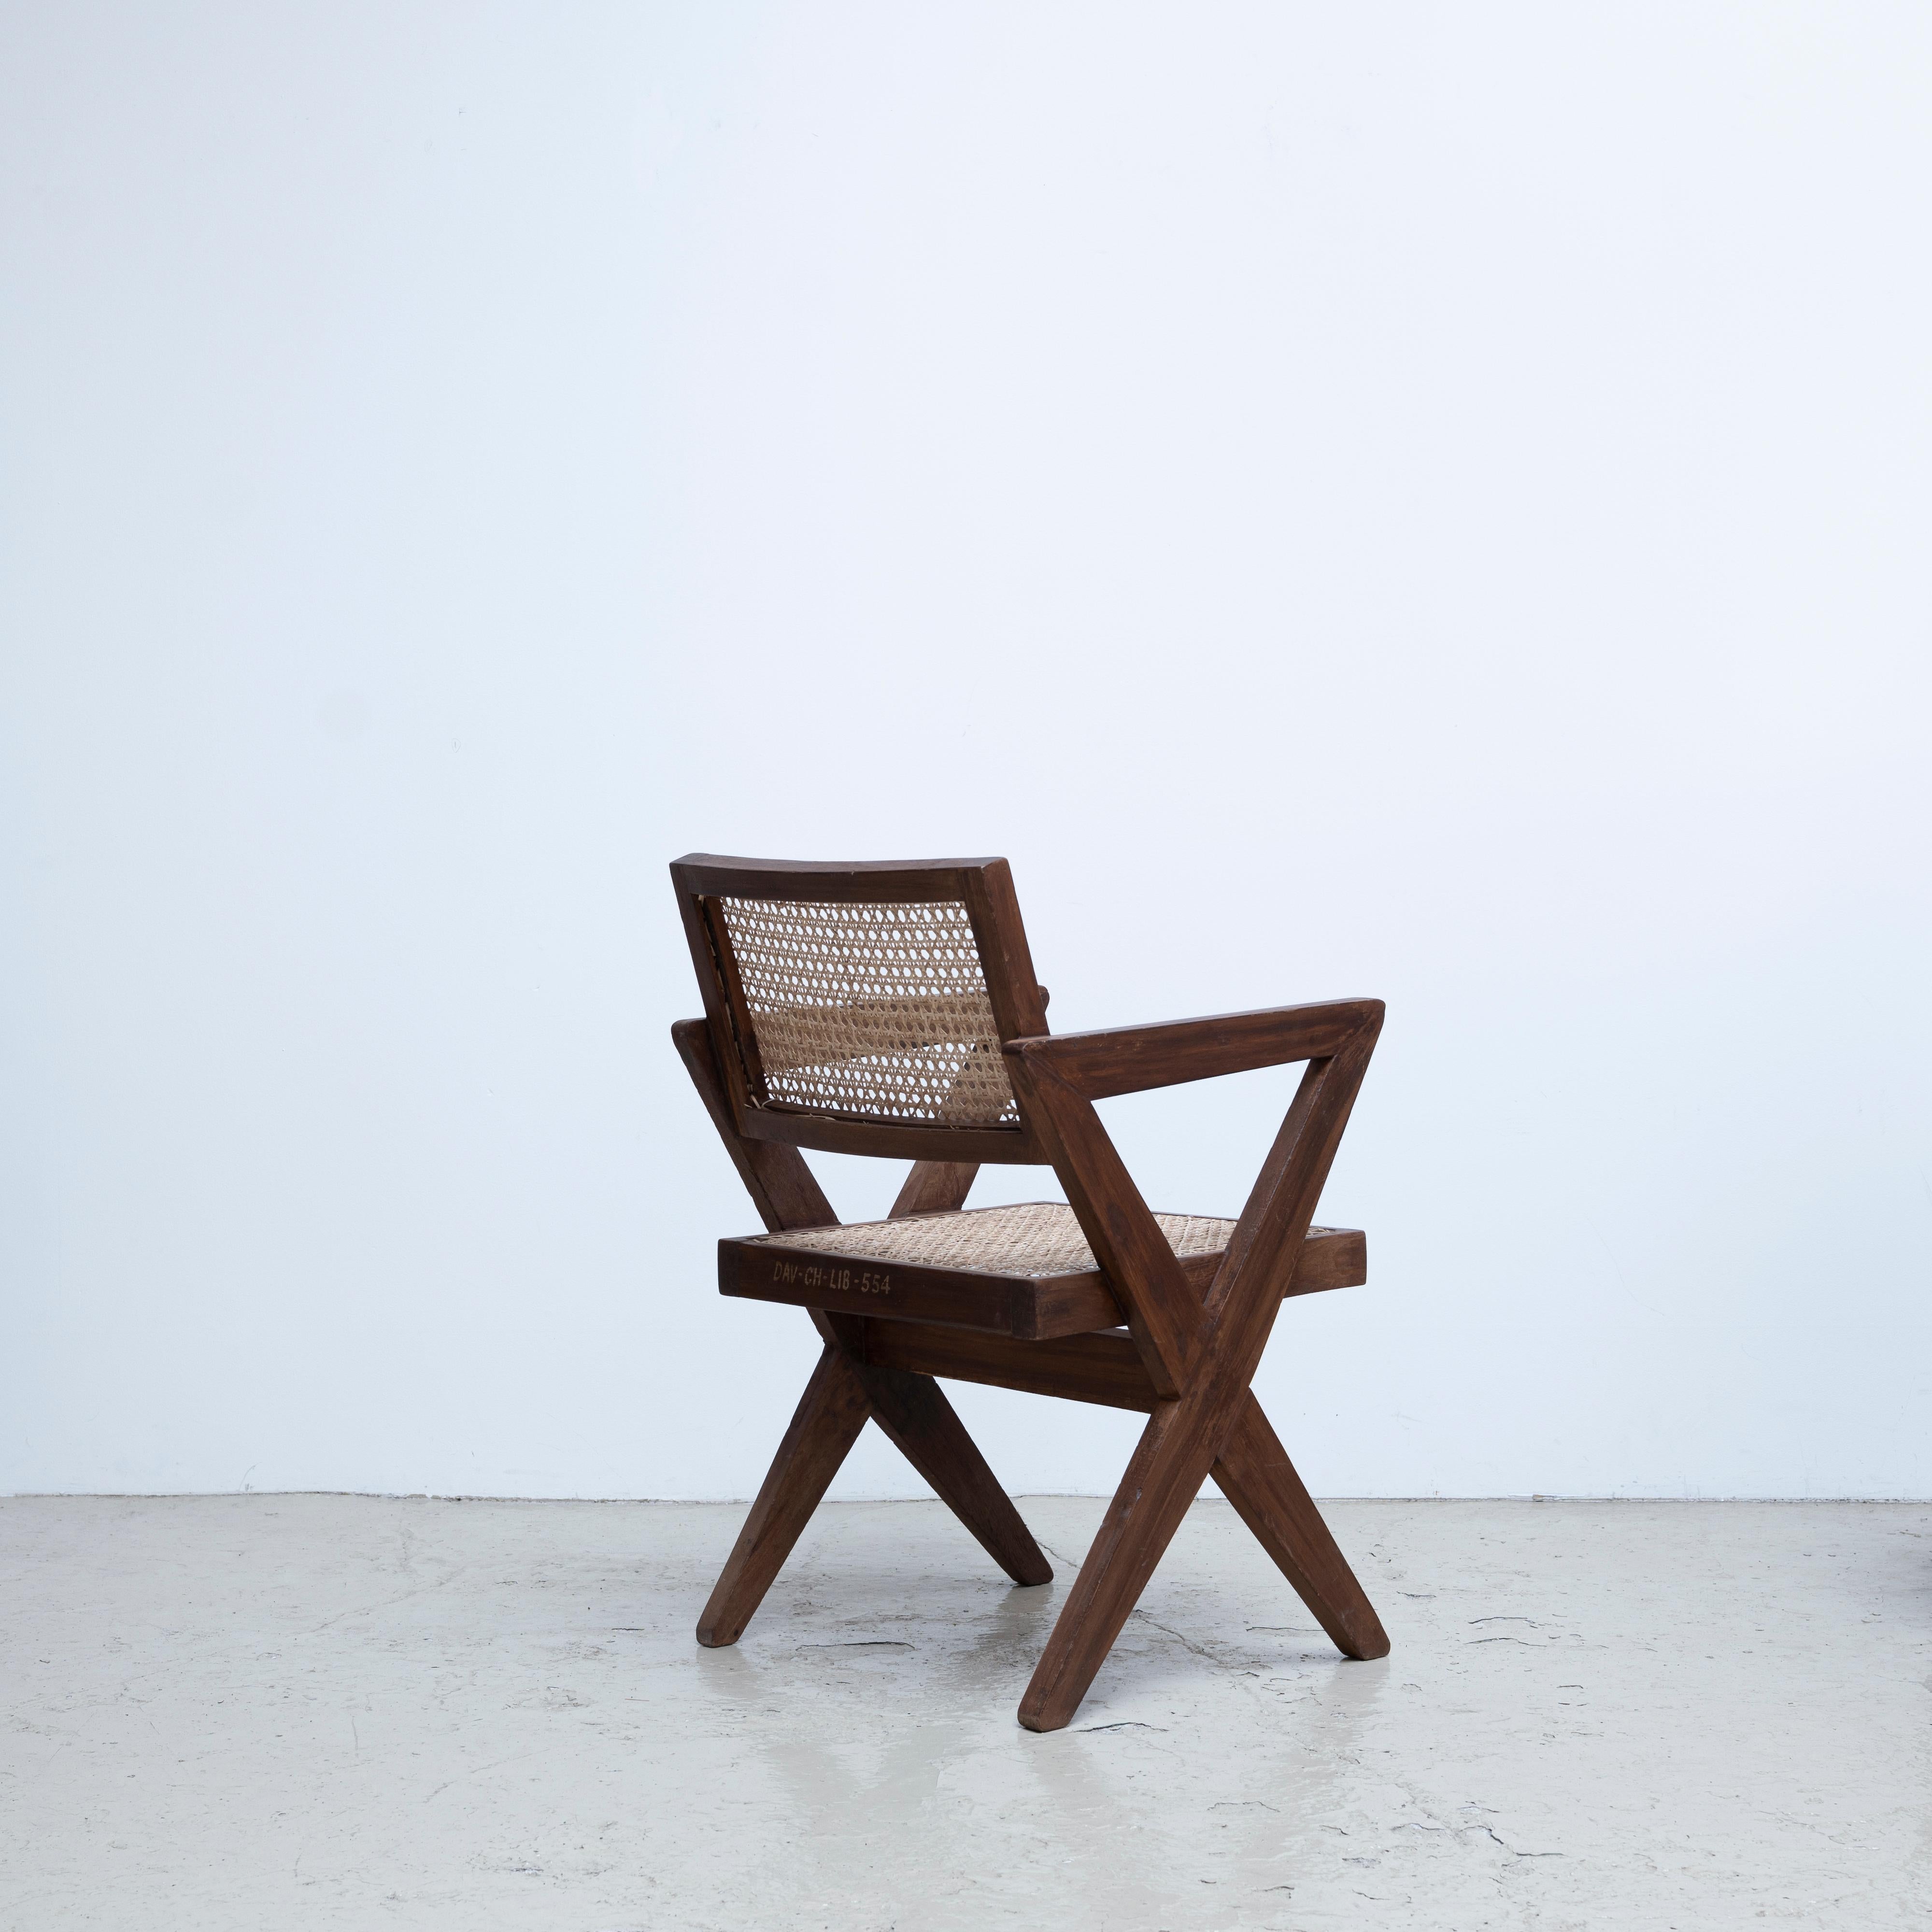 Mid-20th Century Pierre Jeanneret X-Leg Office Chair, circa 1960s, Chandigarh, India For Sale